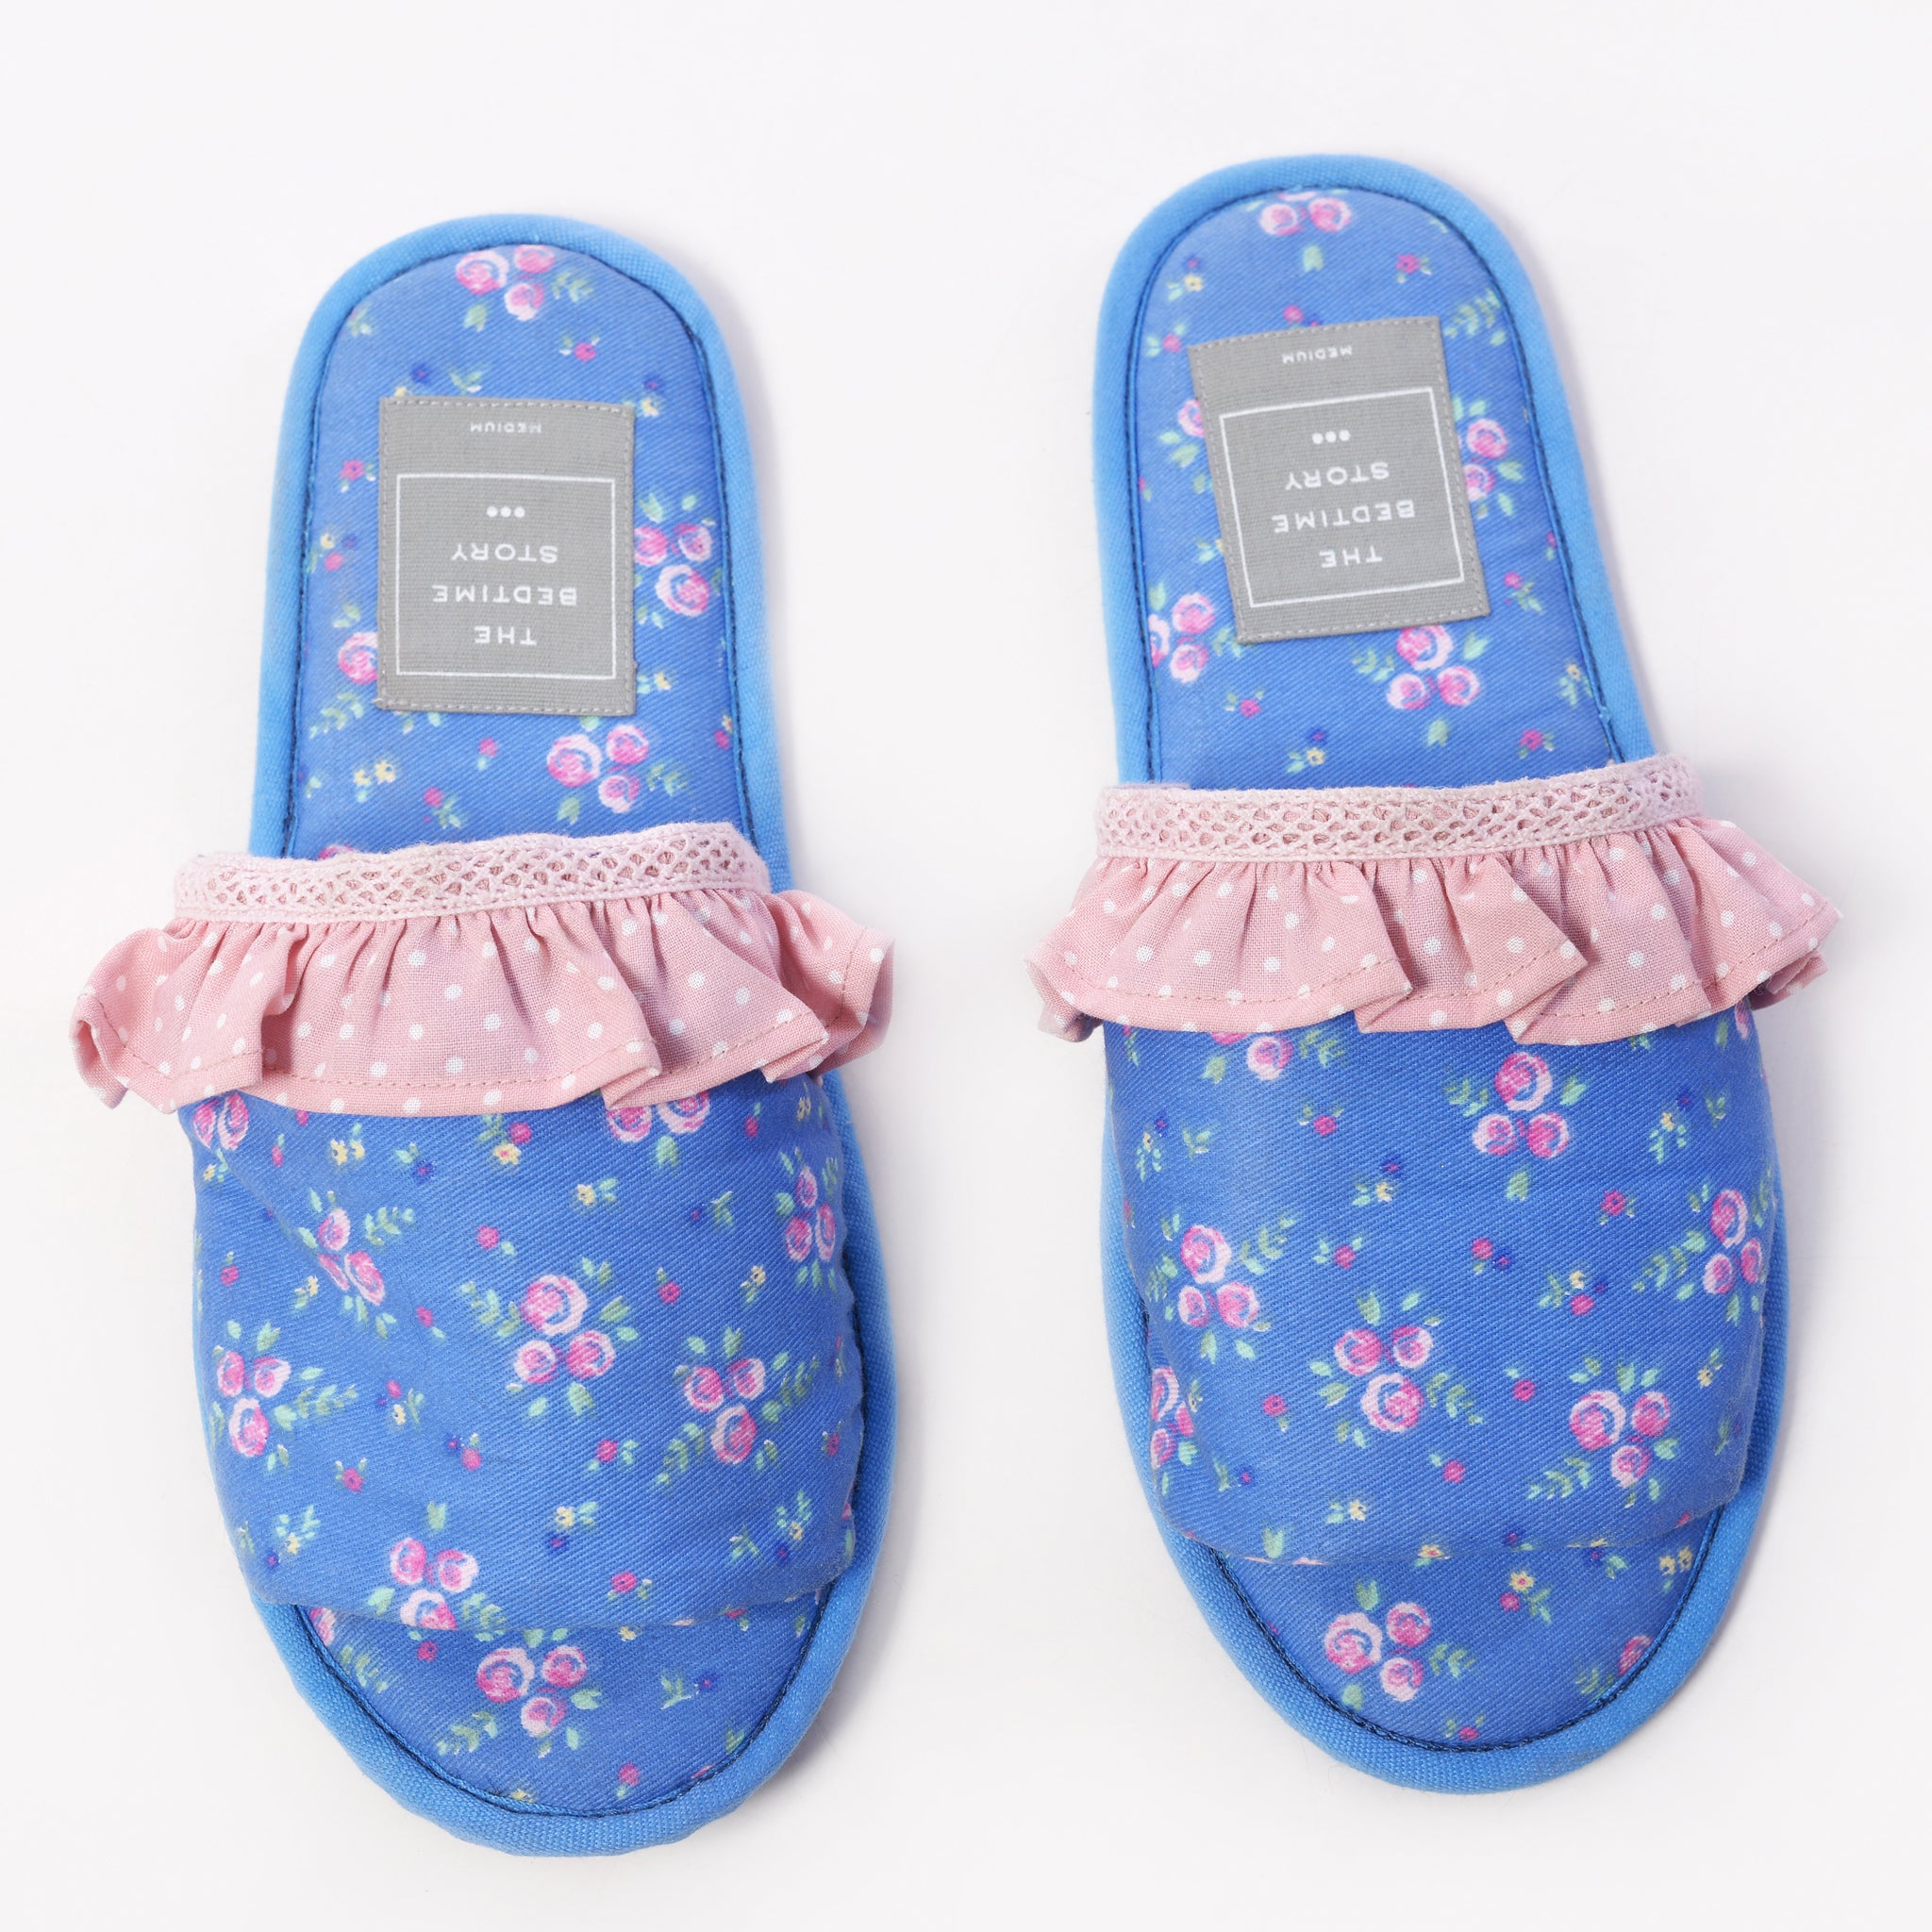 Cobalt Blue Floral Slippers - The Style Salad